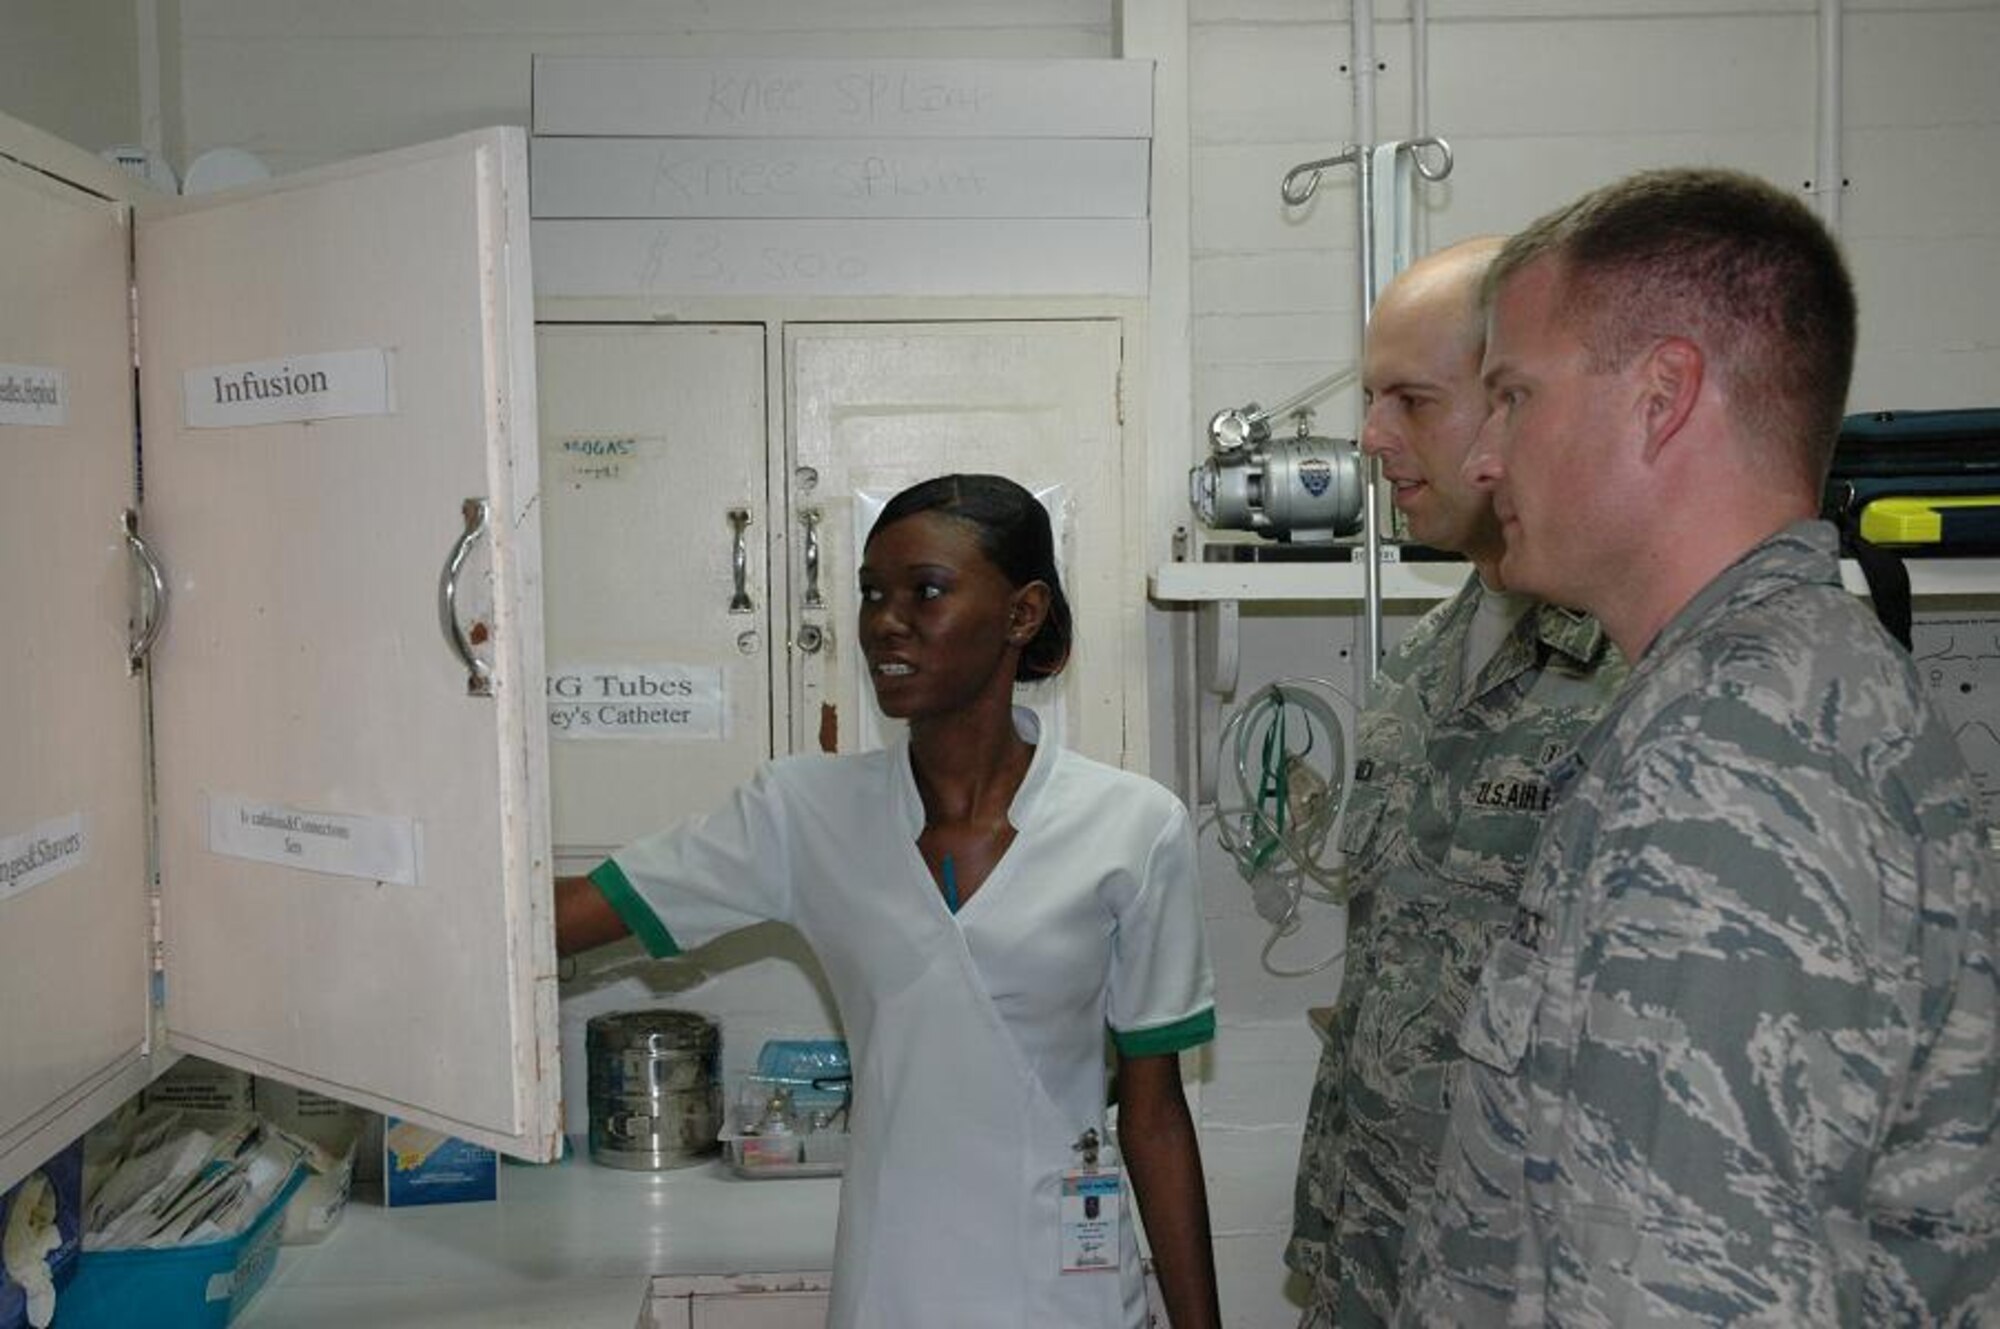 GEORGETOWN, Guyana -- Alicia Moinson, an emergency room nurse at Georgetown's Mercy Hospital, explains types of medical equipment available during
emergencies to Dr. (Capt.) Andrew Muck, inset and Dr. (Capt.) Adam Balls during a hospital tour Monday. (U.S. Air Force photo by Kevin Walston)
